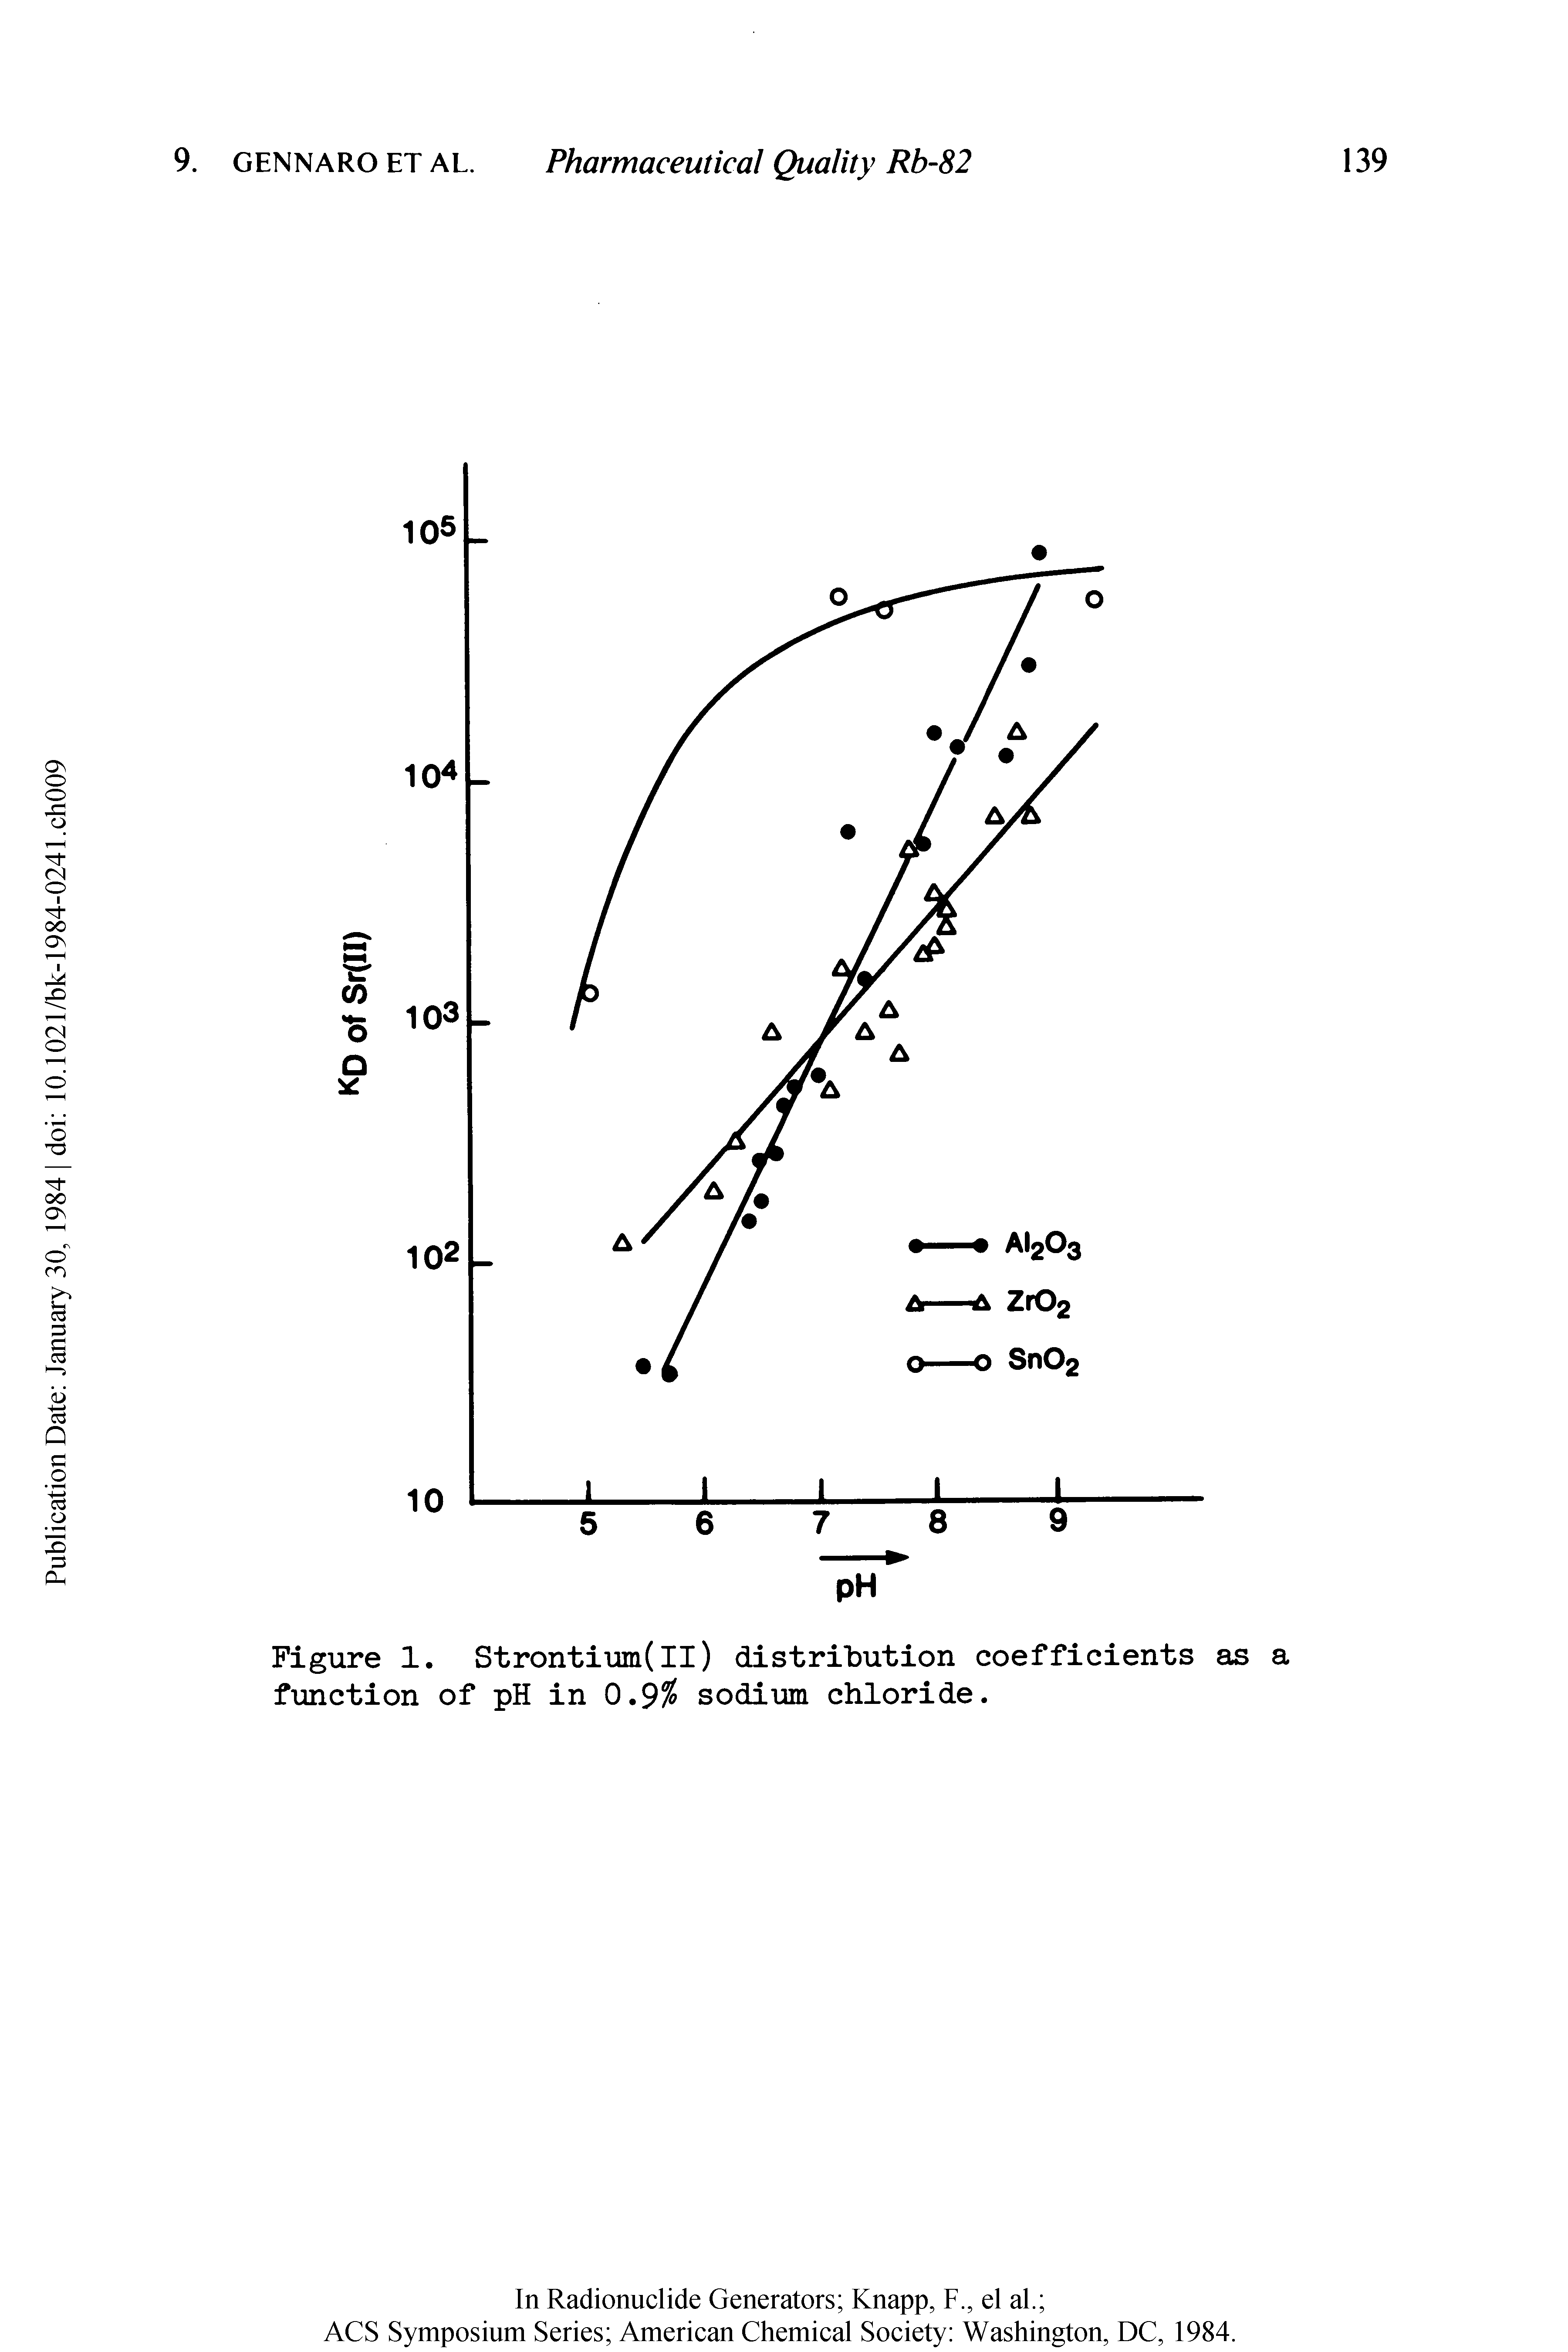 Figure 1. Strontium(ll) distribution coefficients as a function of pH in 0.9% sodium chloride.